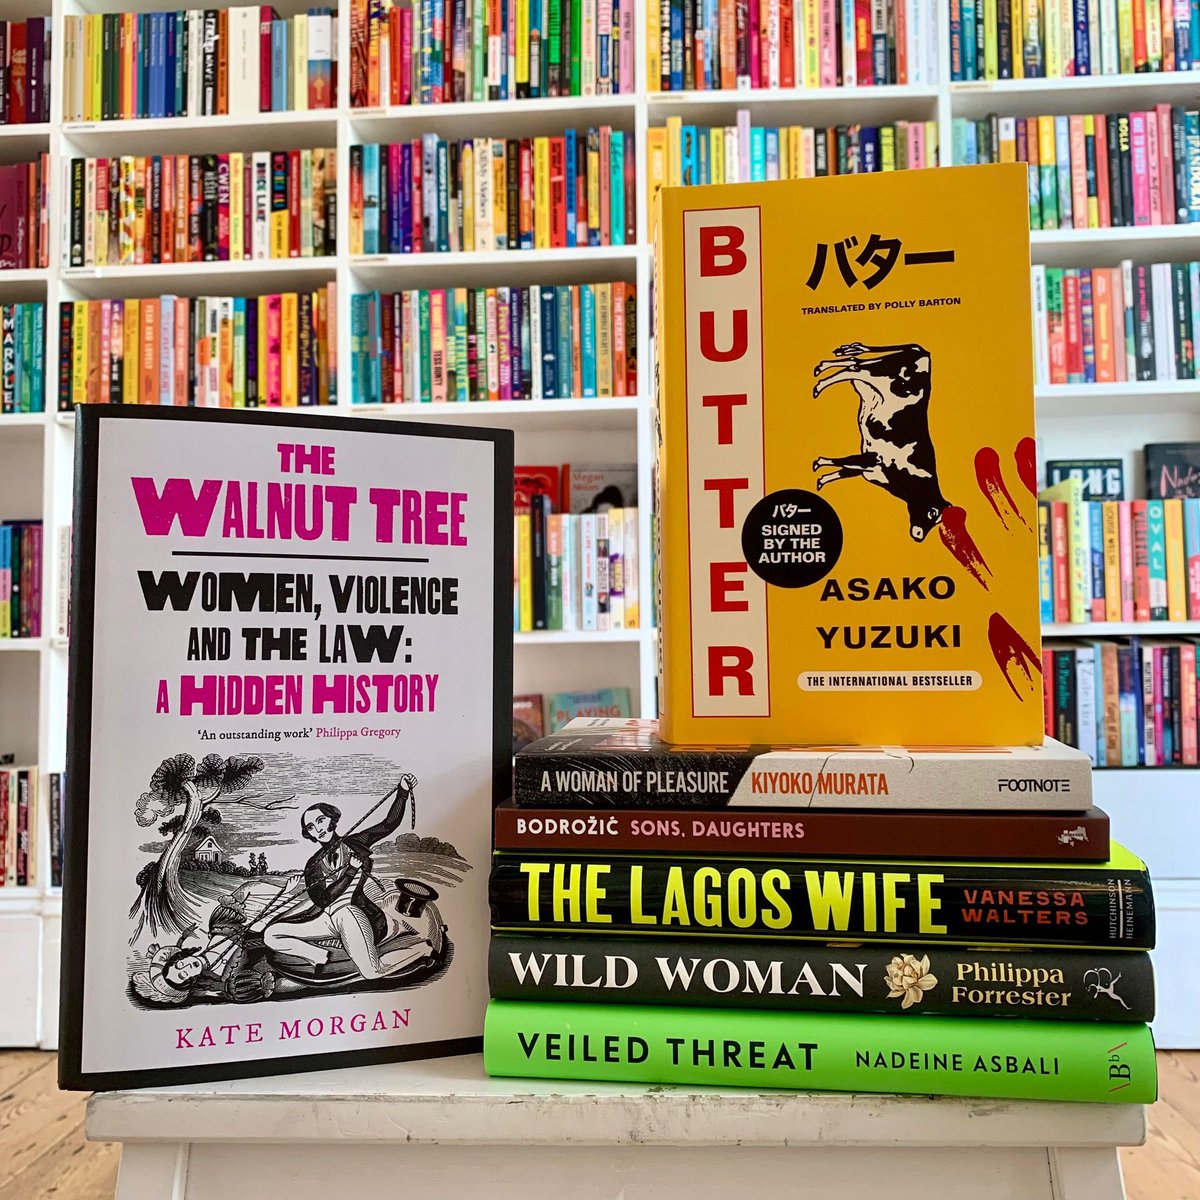 NEW IN Some exciting new releases this week from the highly anticipated Butter (if gourmet cannibalism is your vibe, dinner's ready!), the hidden history of gender-based violence under the British Law, an immersive thriller set in Lagos and more! ✨